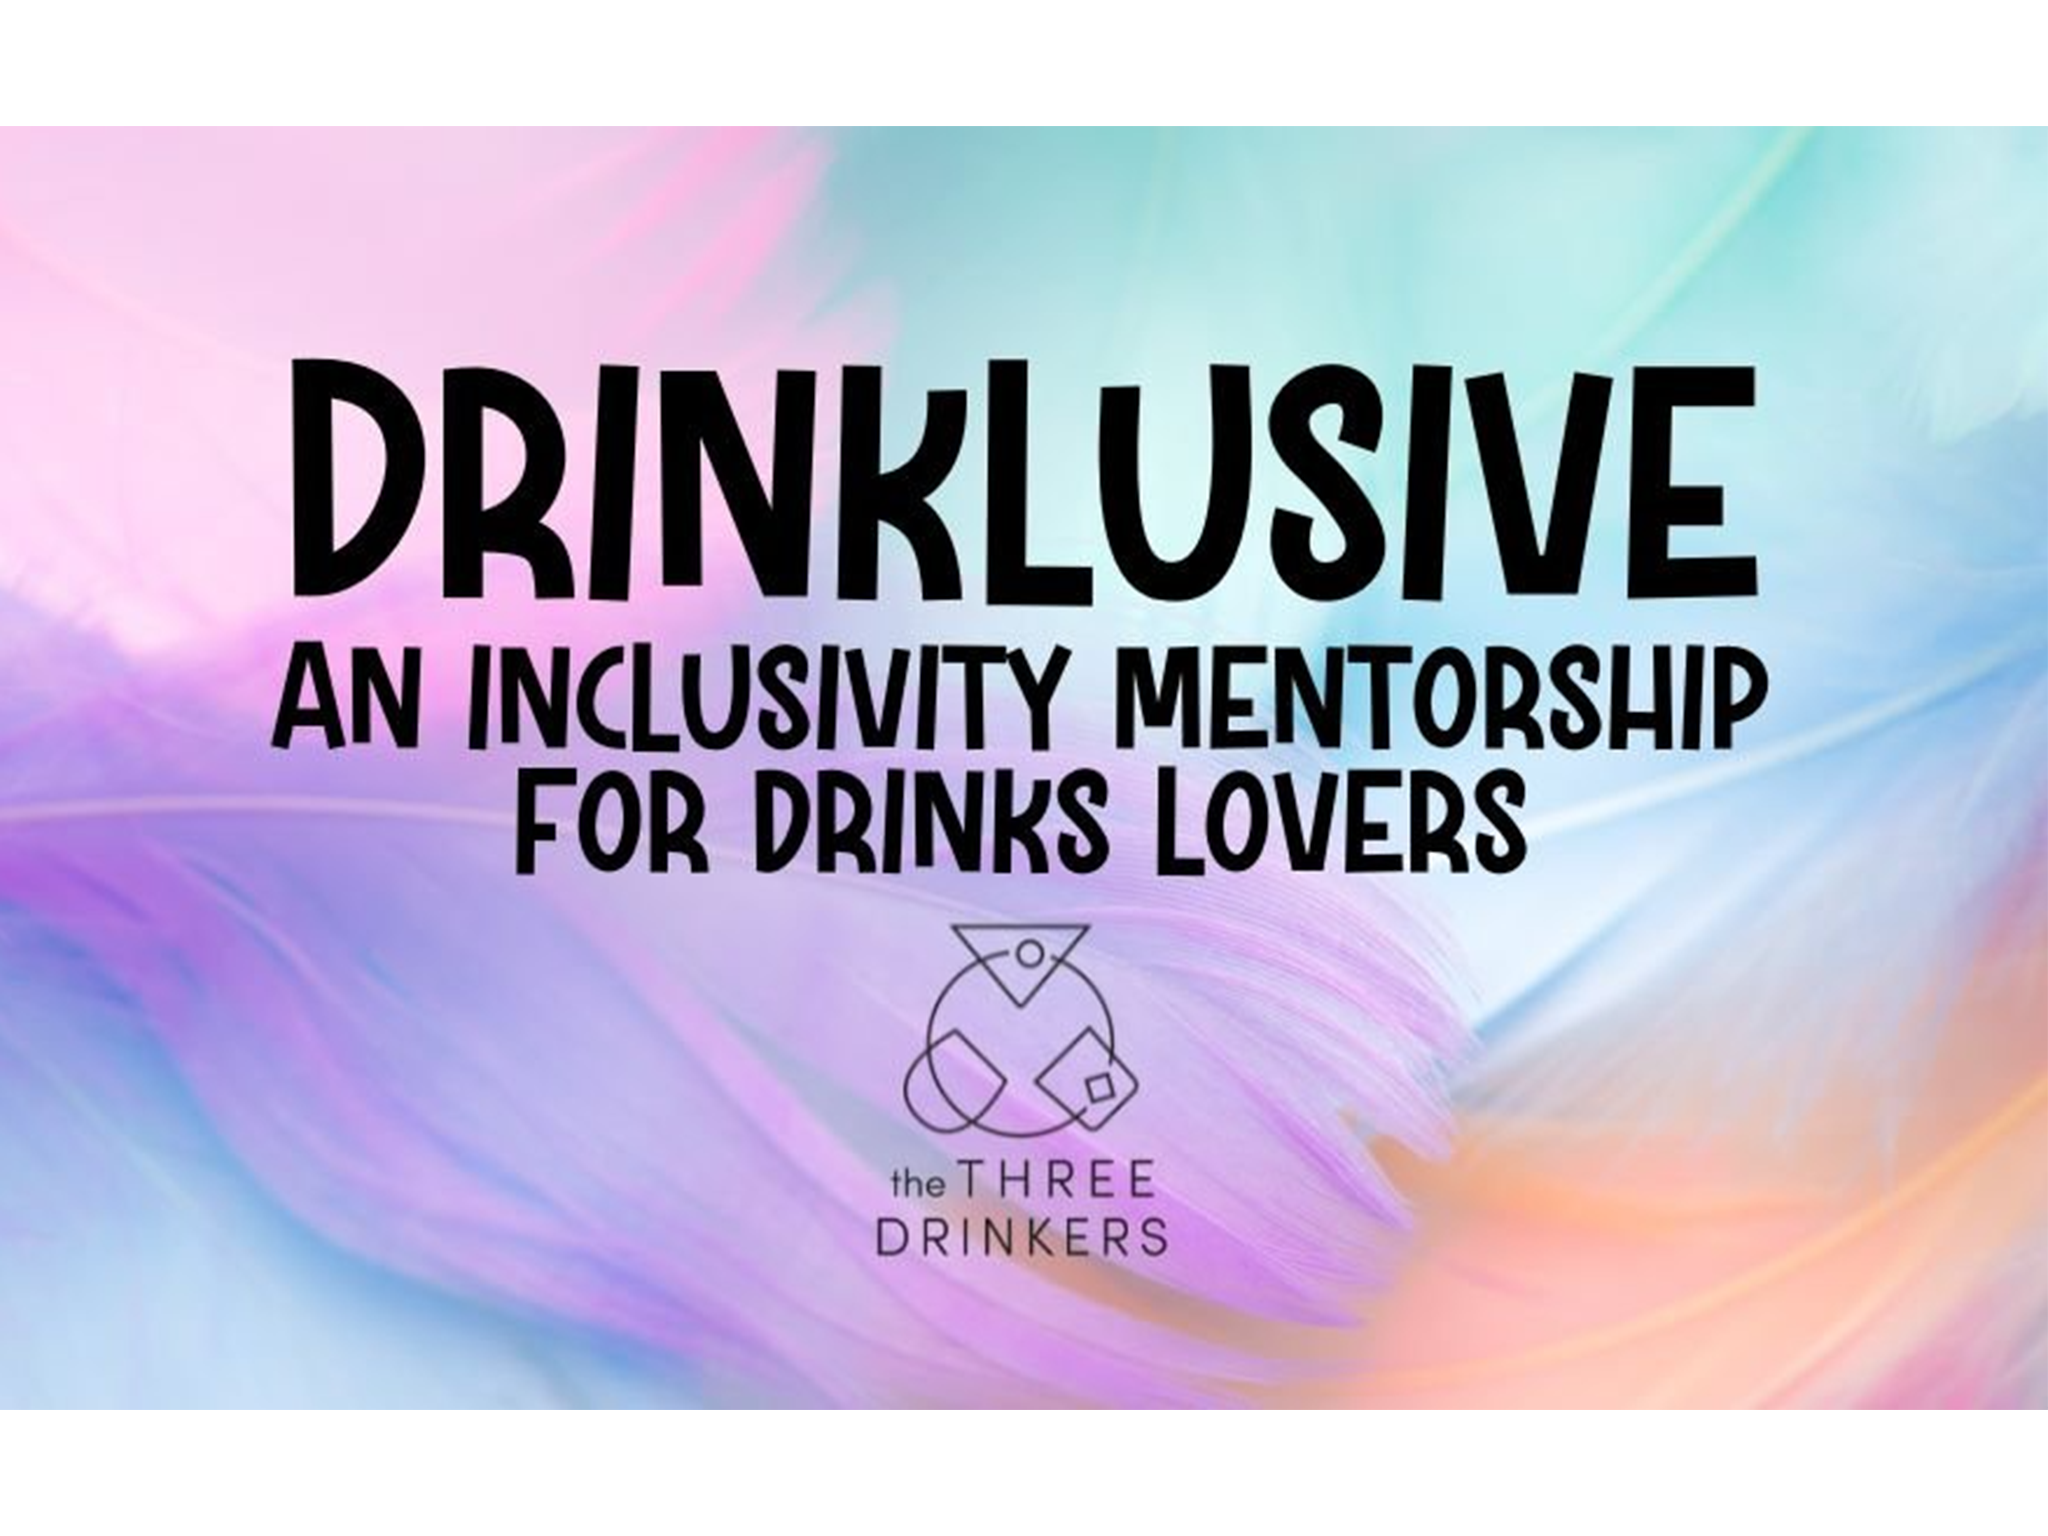 Six mentees will be onboarded onto the Drinklusive mentorship